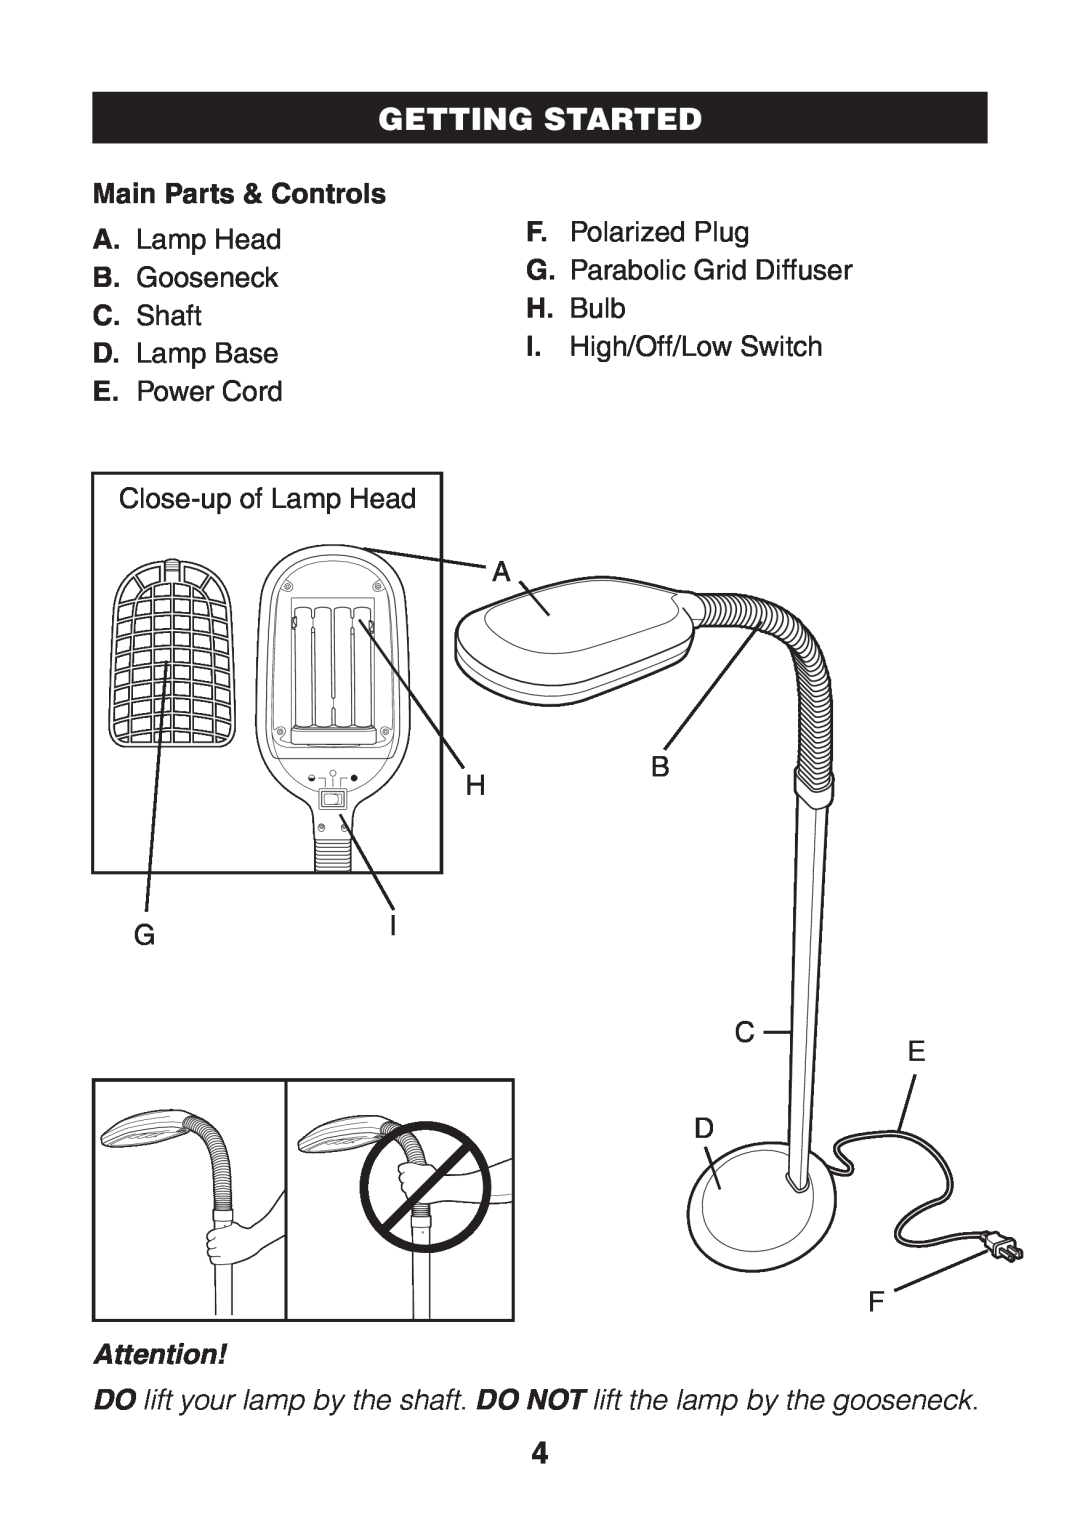 Verilux VF01 manual Getting Started, DO lift your lamp by the shaft. DO NOT lift the lamp by the gooseneck 